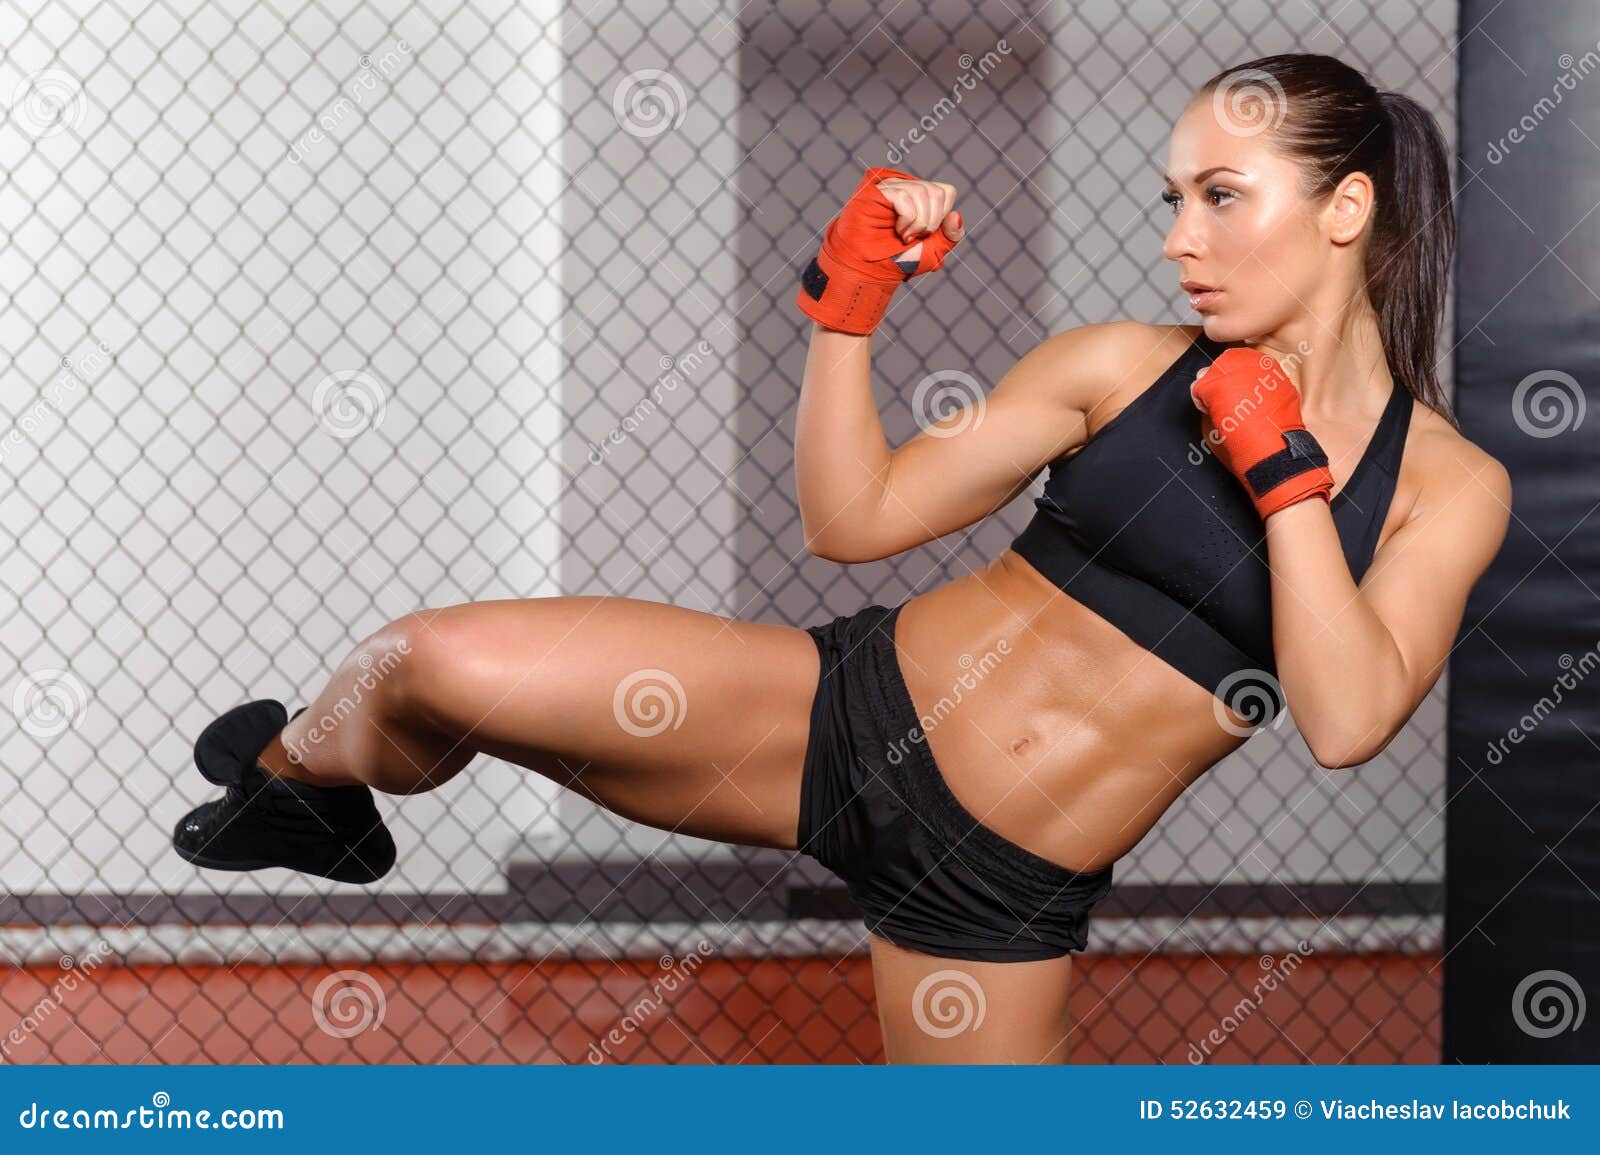 Female Boxer Fighting in a Ring Stock Image - Image of muscular, bandage:  52632459